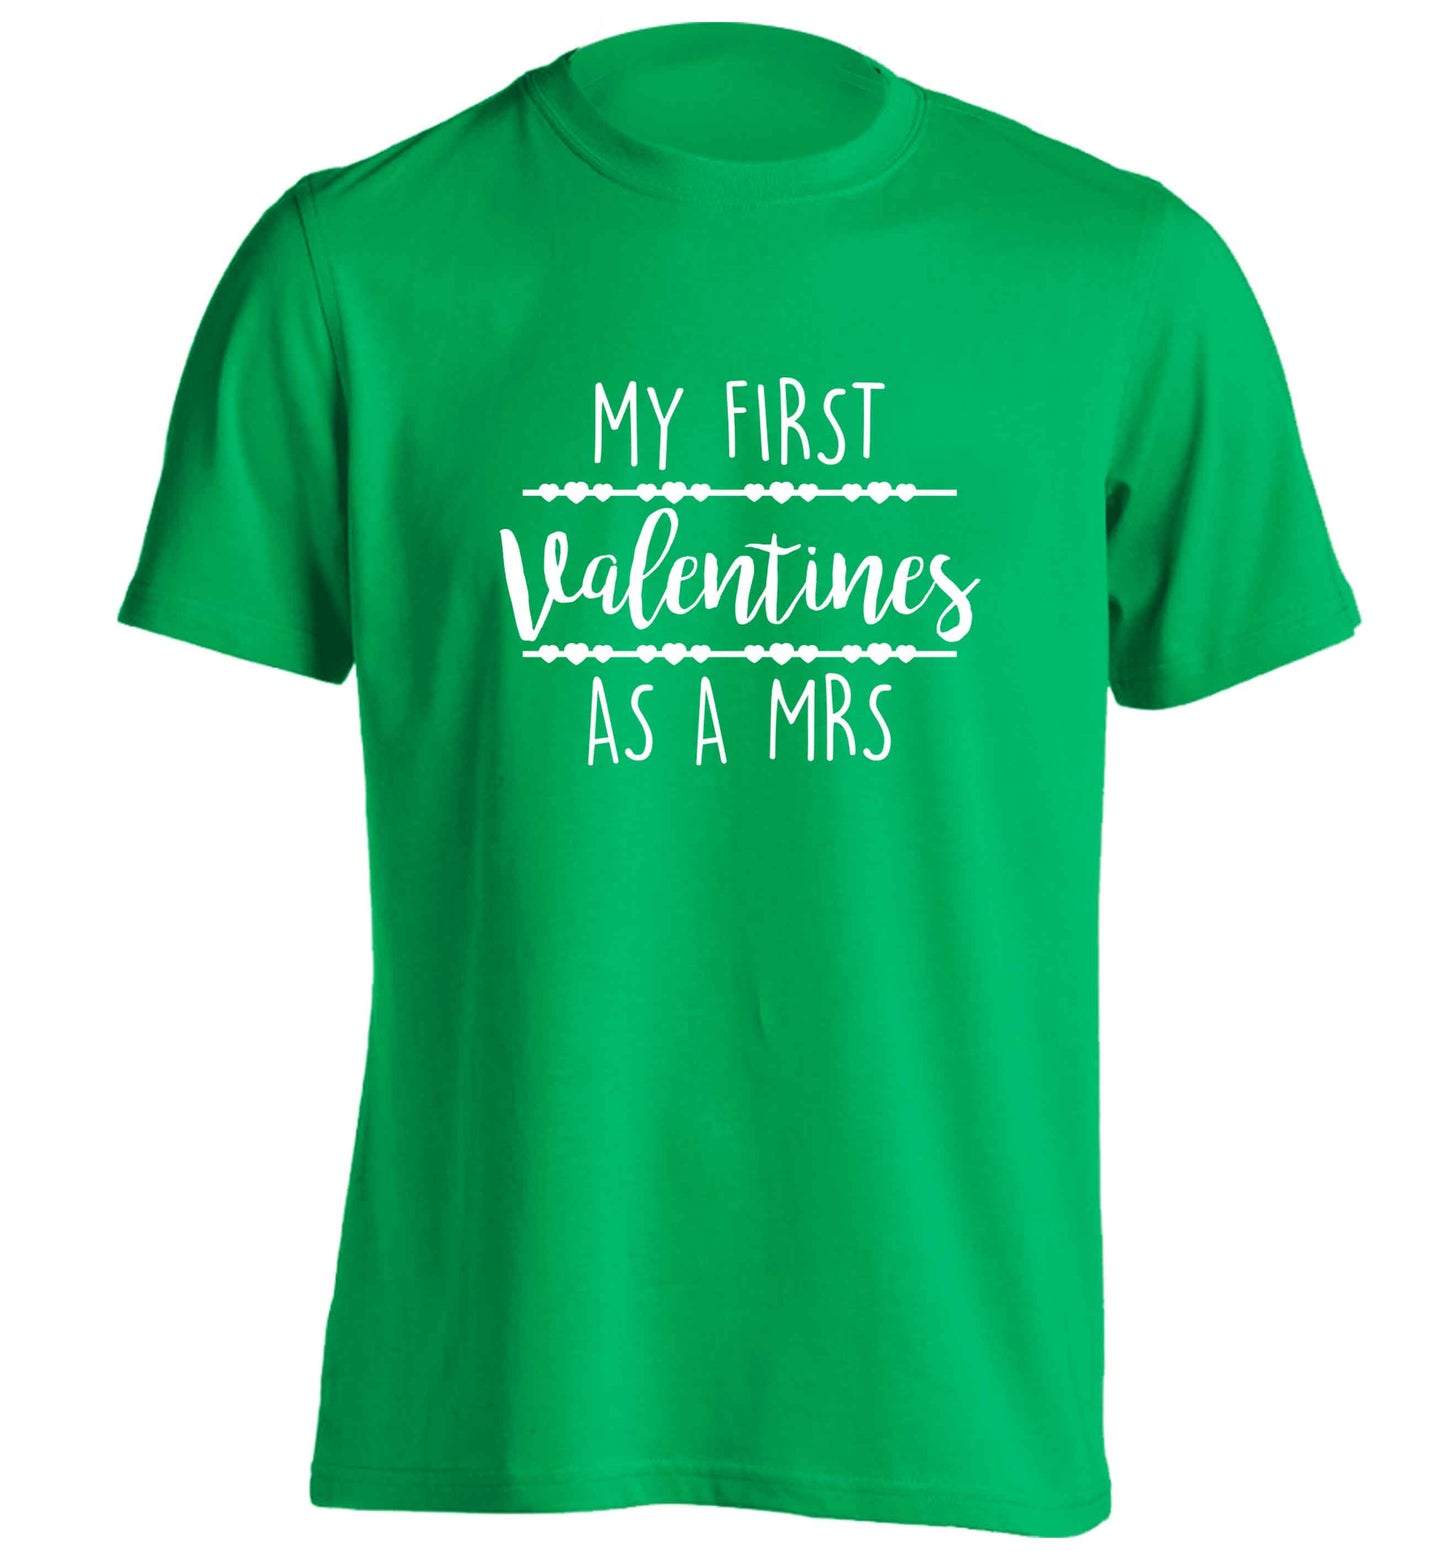 My first valentines as a Mrs adults unisex green Tshirt 2XL